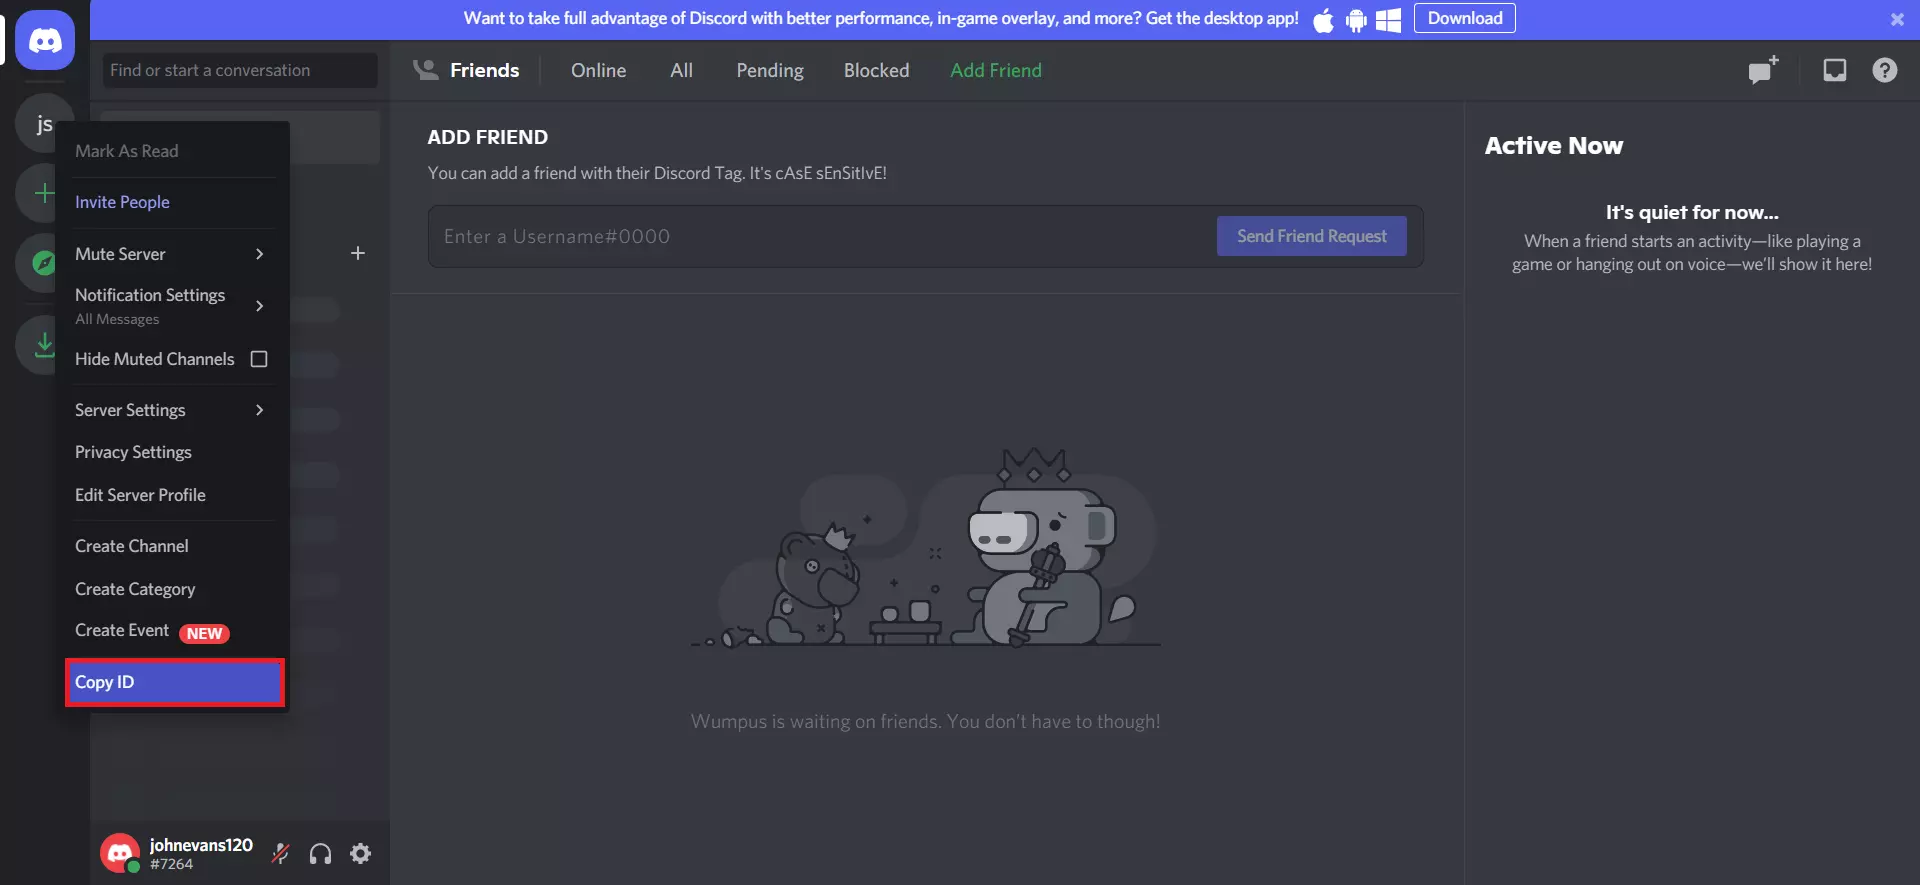 wordpress to discord role mapping copy the guide ID discord Integration